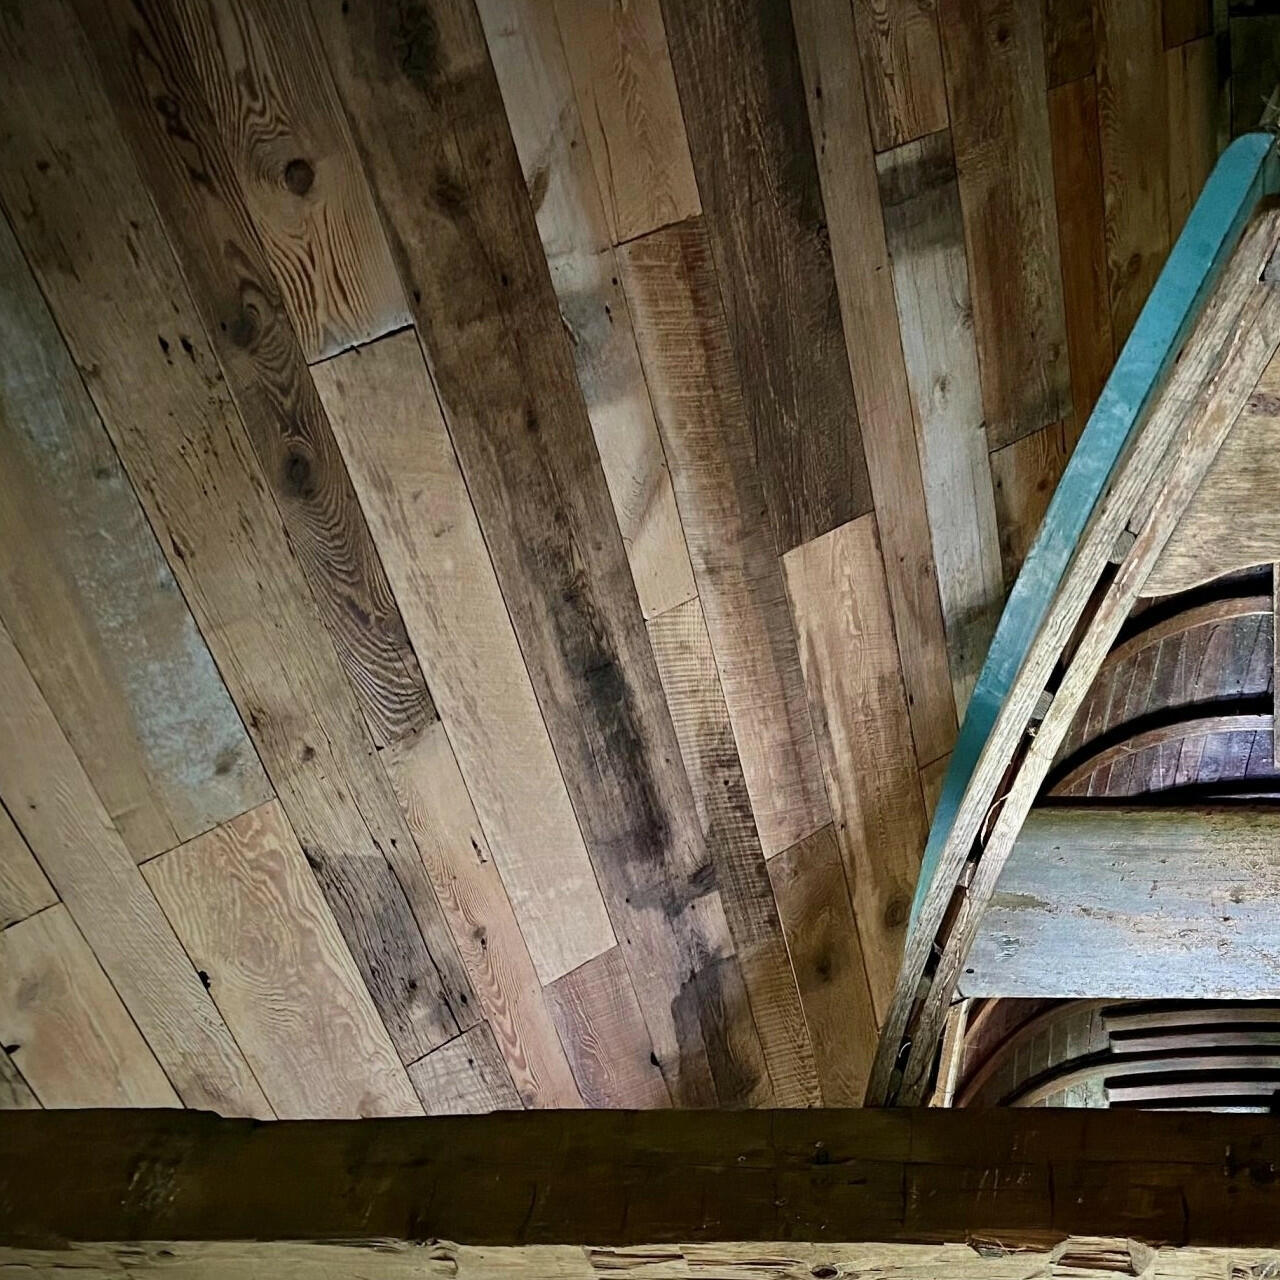 barnwood paneling on a ceiling. Barnwood paneling on wall is varied in width and length, showing many variations and characteristics.